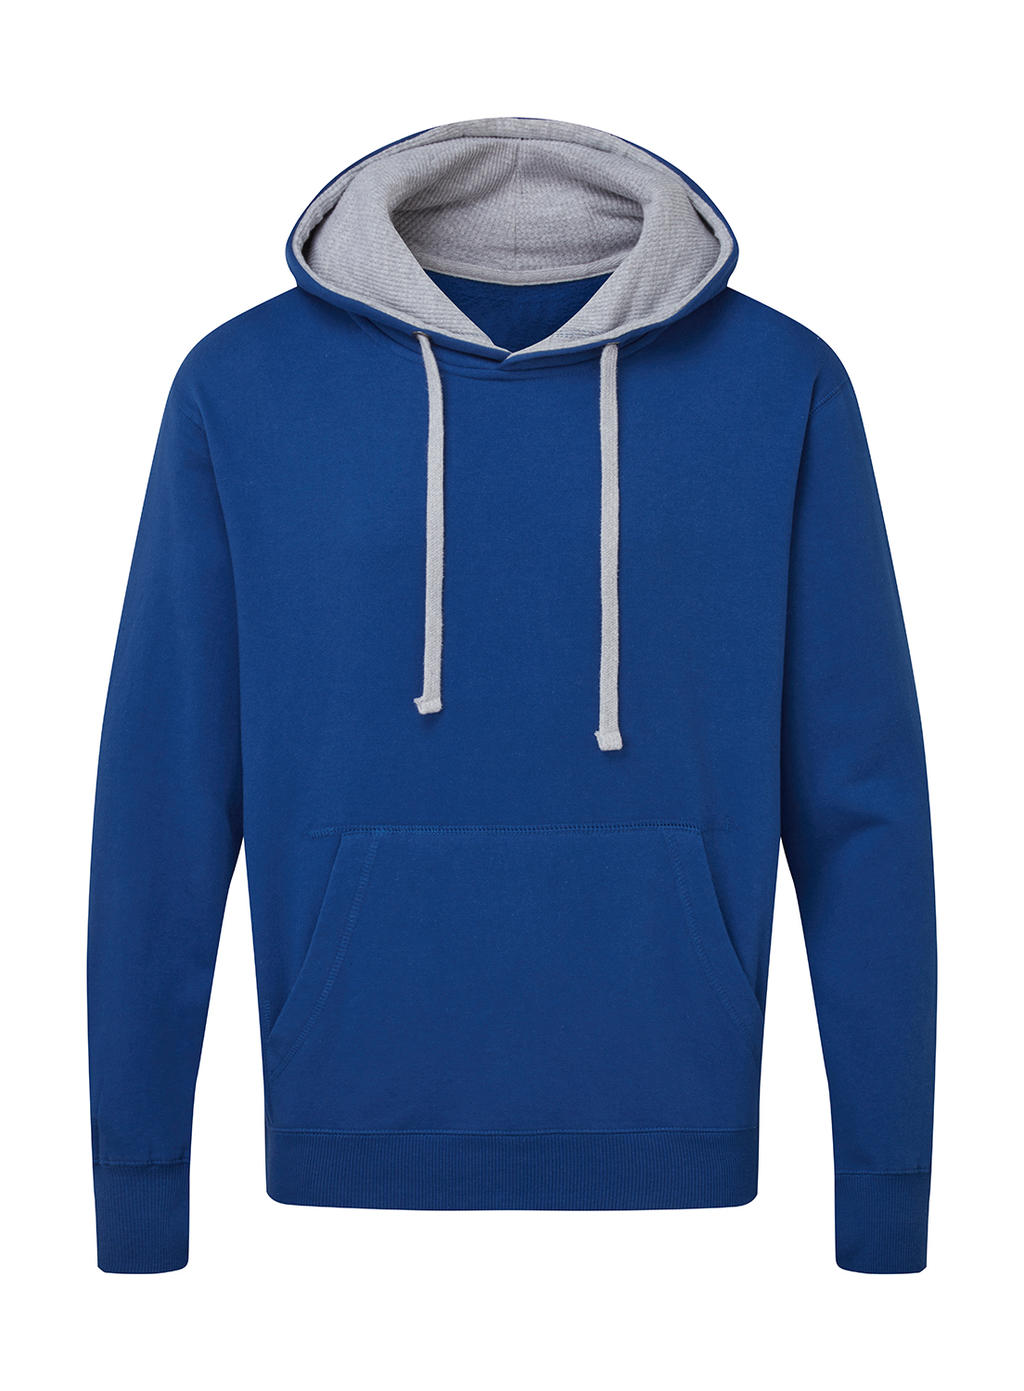  Mens Contrast Hoodie in Farbe Royal/Light Oxford